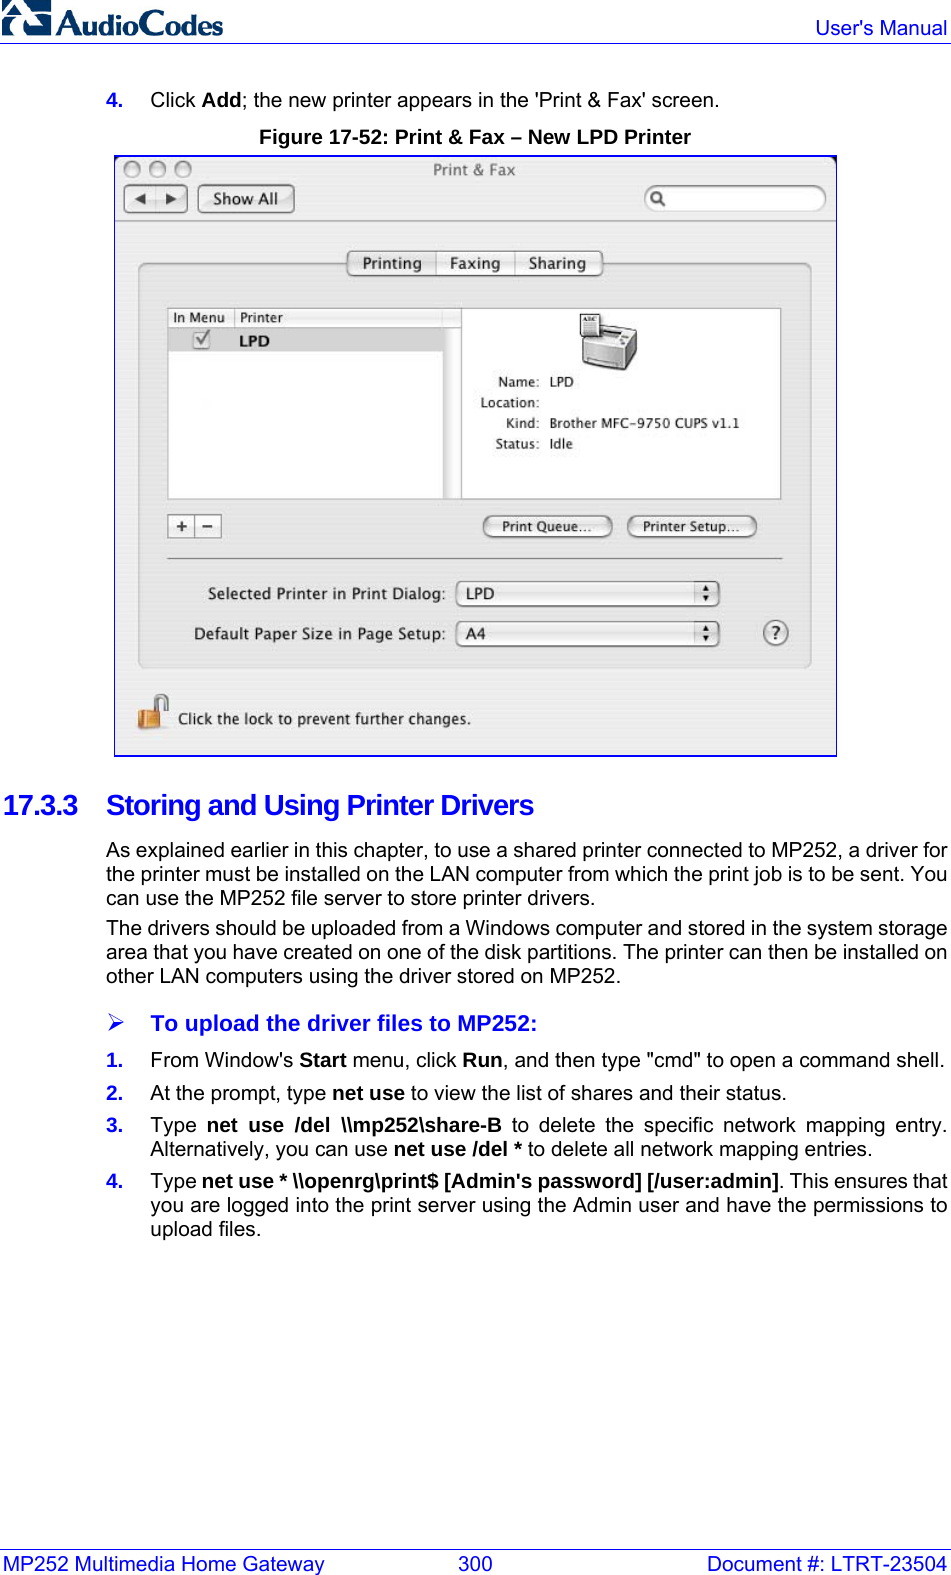 MP252 Multimedia Home Gateway  300  Document #: LTRT-23504  User&apos;s Manual  4.  Click Add; the new printer appears in the &apos;Print &amp; Fax&apos; screen. Figure 17-52: Print &amp; Fax – New LPD Printer  17.3.3  Storing and Using Printer Drivers As explained earlier in this chapter, to use a shared printer connected to MP252, a driver for the printer must be installed on the LAN computer from which the print job is to be sent. You can use the MP252 file server to store printer drivers. The drivers should be uploaded from a Windows computer and stored in the system storage area that you have created on one of the disk partitions. The printer can then be installed on other LAN computers using the driver stored on MP252.  ¾ To upload the driver files to MP252: 1.  From Window&apos;s Start menu, click Run, and then type &quot;cmd&quot; to open a command shell. 2.  At the prompt, type net use to view the list of shares and their status.  3.  Type  net use /del \\mp252\share-B to delete the specific network mapping entry.  Alternatively, you can use net use /del * to delete all network mapping entries.  4.  Type net use * \\openrg\print$ [Admin&apos;s password] [/user:admin]. This ensures that you are logged into the print server using the Admin user and have the permissions to upload files.  